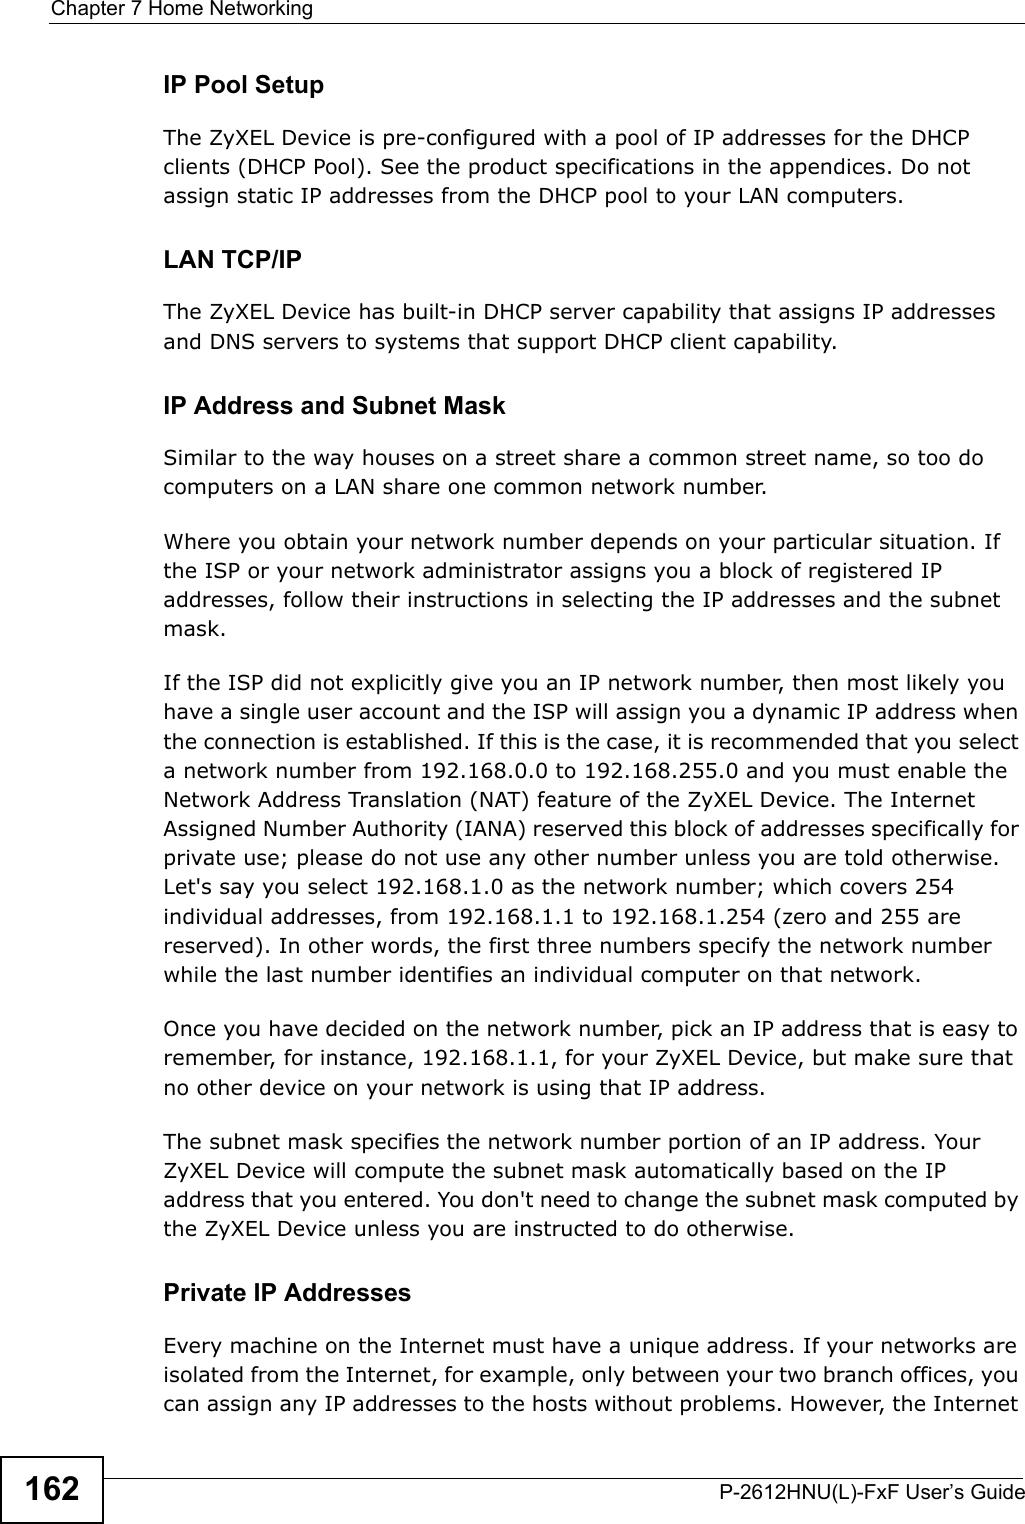 Chapter 7 Home NetworkingP-2612HNU(L)-FxF User’s Guide162IP Pool SetupThe ZyXEL Device is pre-configured with a pool of IP addresses for the DHCP clients (DHCP Pool). See the product specifications in the appendices. Do notassign static IP addresses from the DHCP pool to your LAN computers.LAN TCP/IP The ZyXEL Device has built-in DHCP server capability that assigns IP addresses and DNS servers to systems that support DHCP client capability.IP Address and Subnet MaskSimilar to the way houses on a street share a common street name, so too do computers on a LAN share one common network number.Where you obtain your network number depends on your particular situation. If the ISP or your network administrator assigns you a block of registered IP addresses, follow their instructions in selecting the IP addresses and the subnet mask.If the ISP did not explicitly give you an IP network number, then most likely you have a single user account and the ISP will assign you a dynamic IP address when the connection is established. If this is the case, it is recommended that you selecta network number from 192.168.0.0 to 192.168.255.0 and you must enable the Network Address Translation (NAT) feature of the ZyXEL Device. The Internet Assigned Number Authority (IANA) reserved this block of addresses specifically for private use; please do not use any other number unless you are told otherwise. Let&apos;s say you select 192.168.1.0 as the network number; which covers 254 individual addresses, from 192.168.1.1 to 192.168.1.254 (zero and 255 are reserved). In other words, the first three numbers specify the network numberwhile the last number identifies an individual computer on that network.Once you have decided on the network number, pick an IP address that is easy toremember, for instance, 192.168.1.1, for your ZyXEL Device, but make sure thatno other device on your network is using that IP address.The subnet mask specifies the network number portion of an IP address. Your ZyXEL Device will compute the subnet mask automatically based on the IP address that you entered. You don&apos;t need to change the subnet mask computed by the ZyXEL Device unless you are instructed to do otherwise.Private IP AddressesEvery machine on the Internet must have a unique address. If your networks are isolated from the Internet, for example, only between your two branch offices, you can assign any IP addresses to the hosts without problems. However, the Internet 